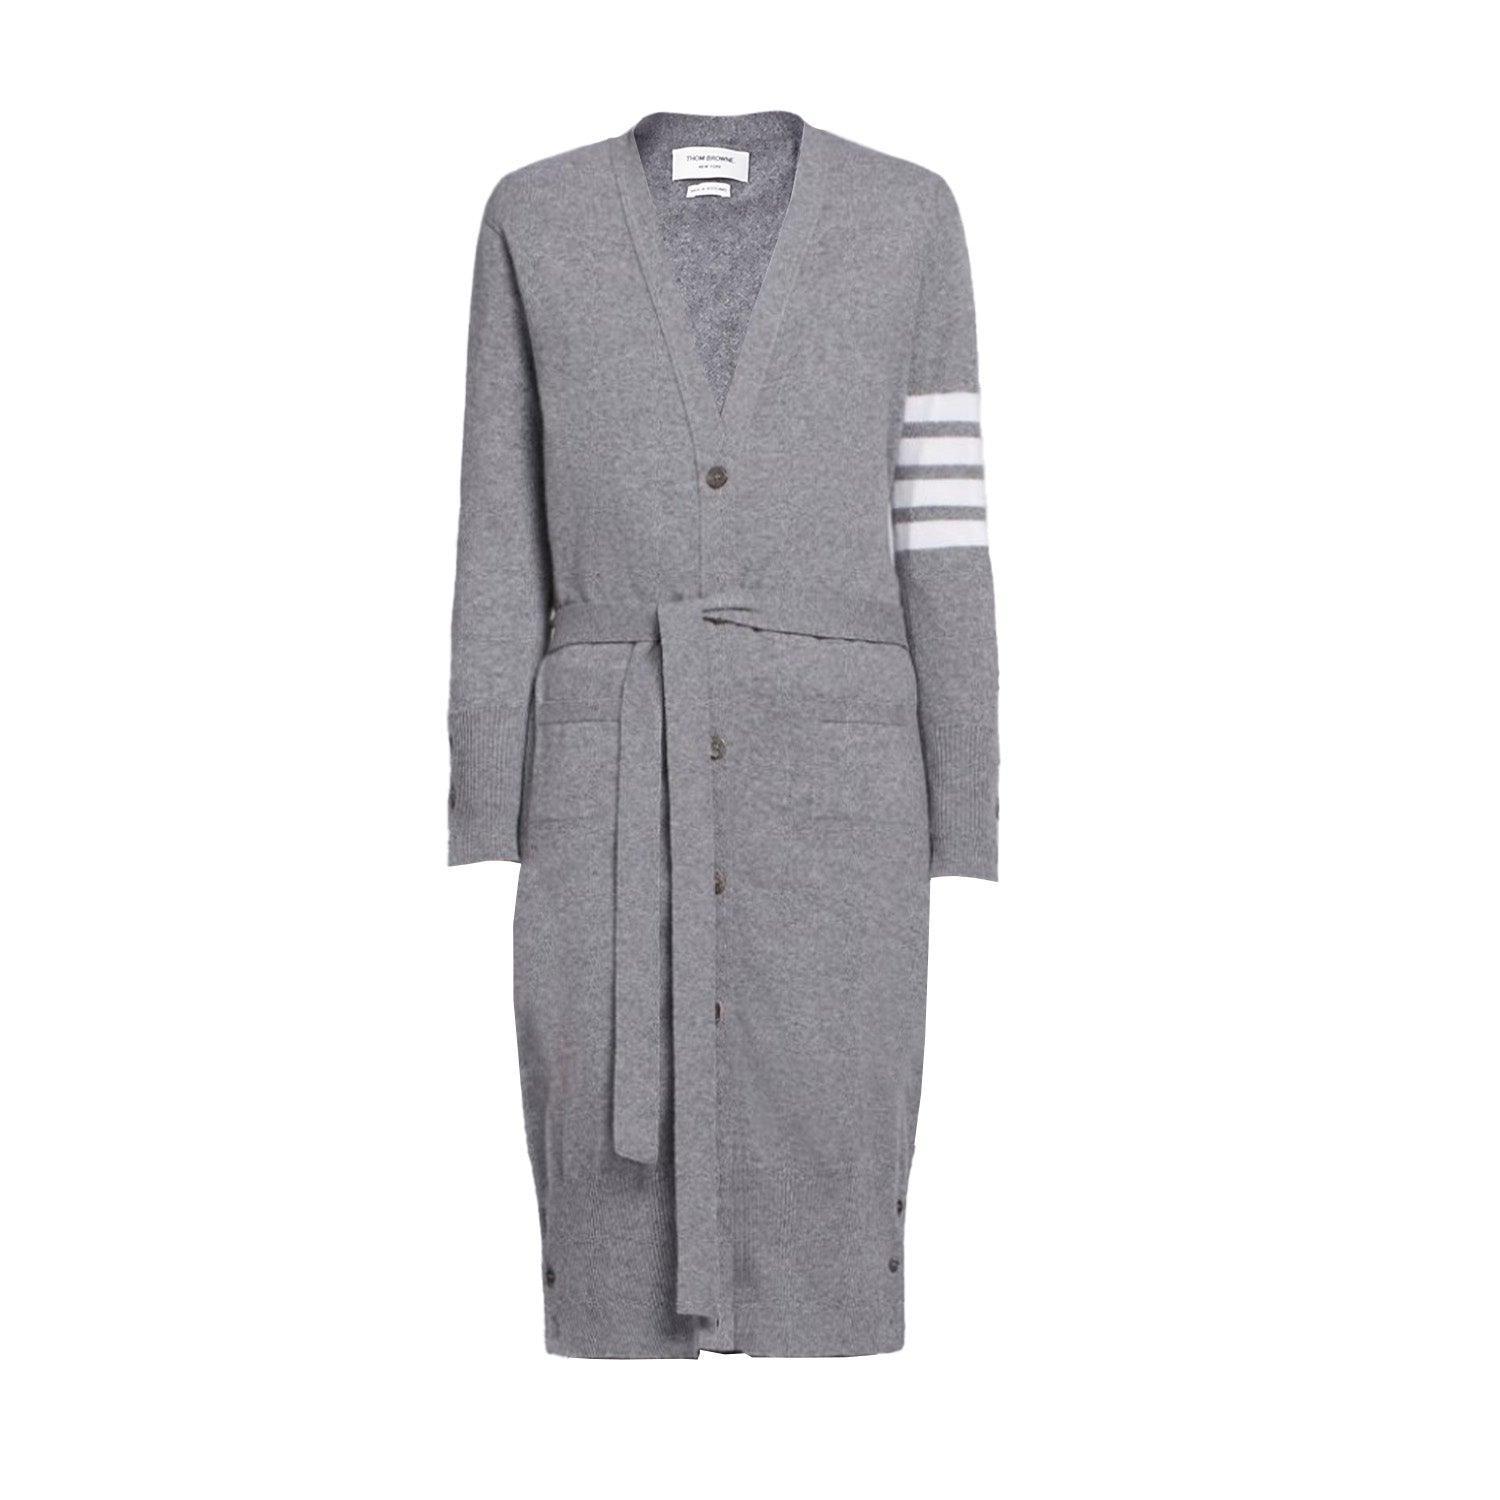 Thom Browne Cardigan - Women's 40 - Fashionably Yours